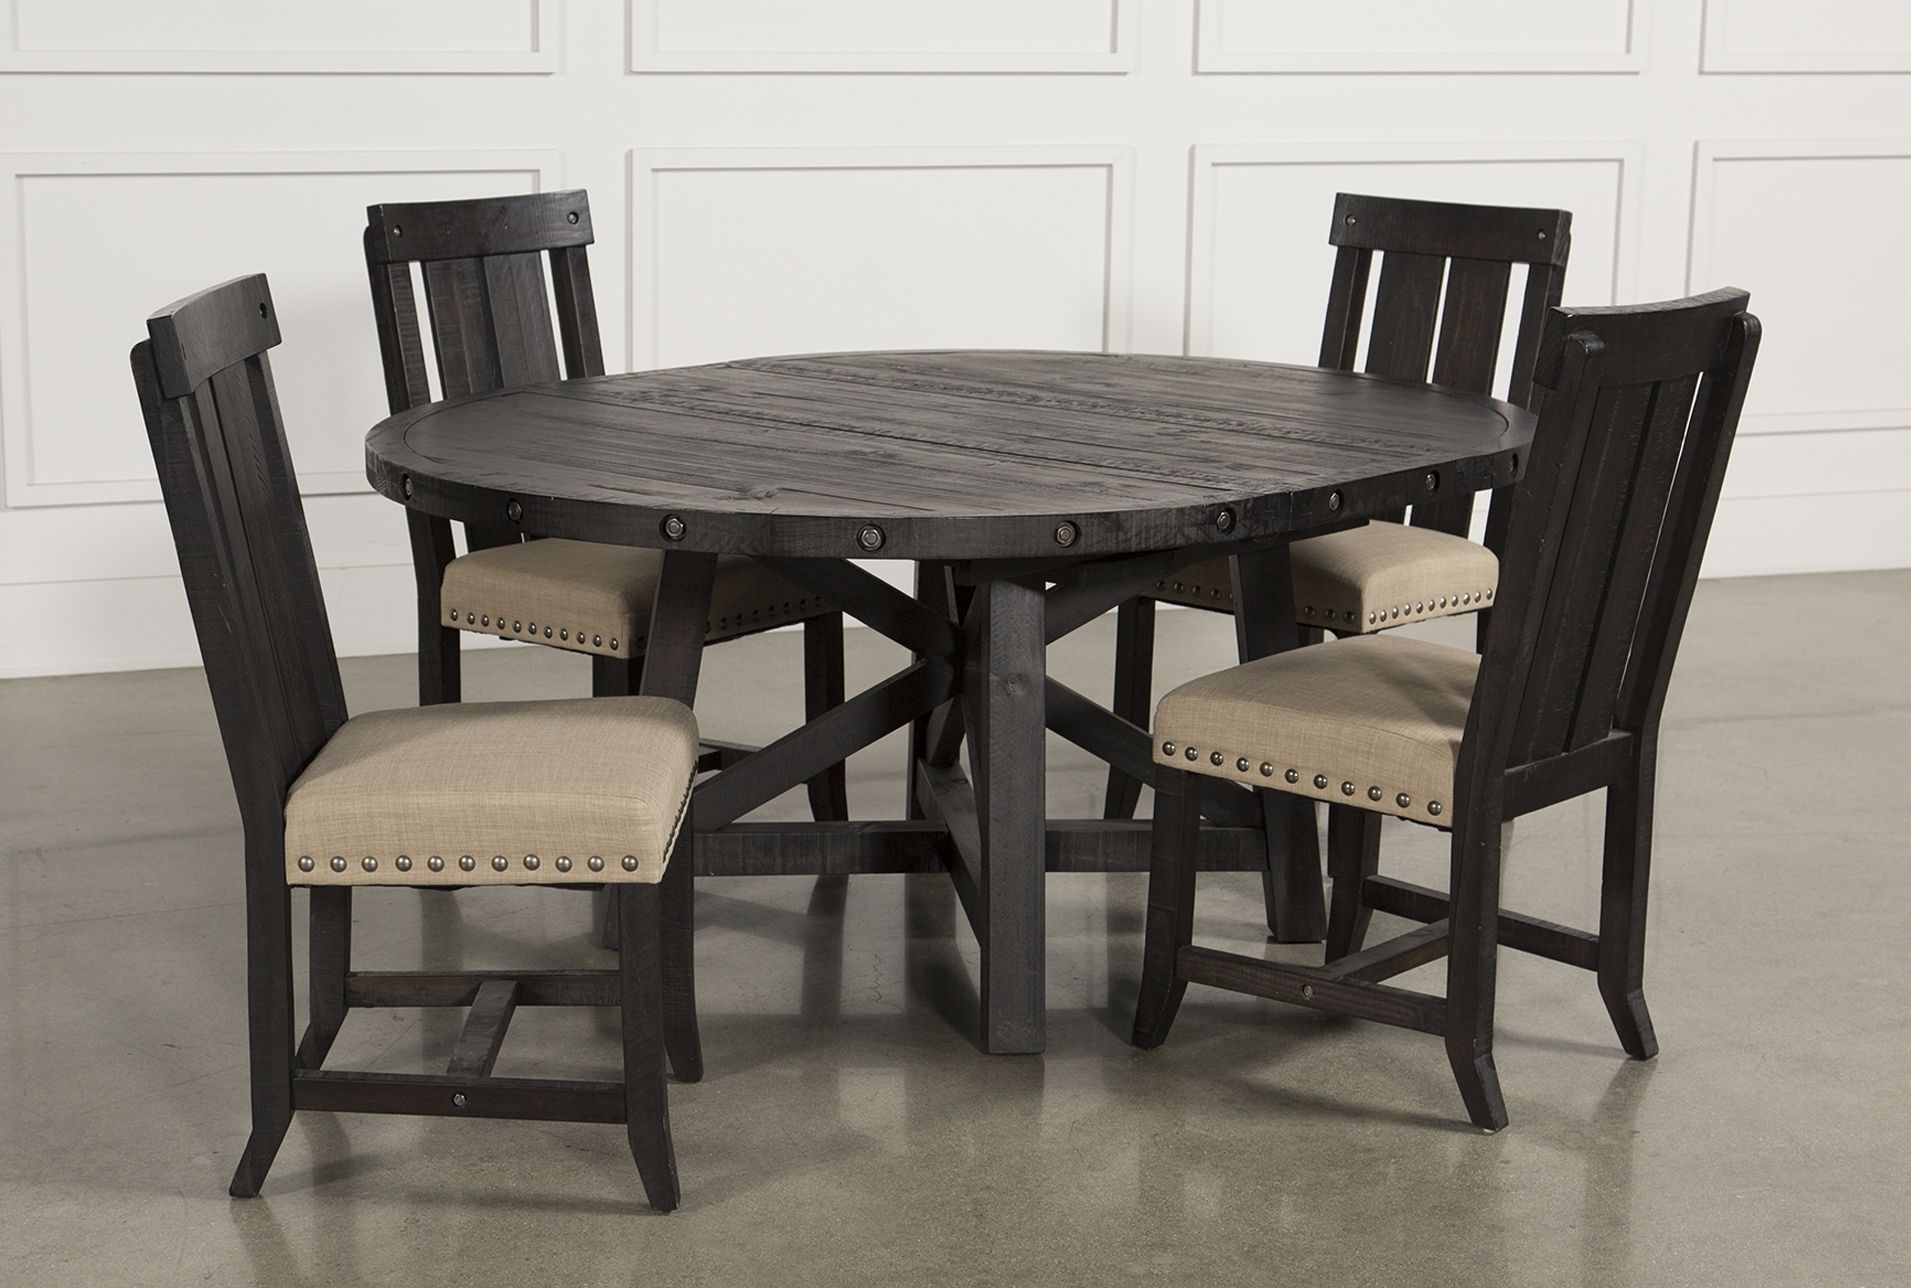 Jaxon 5 Piece Extension Round Dining Set W/wood Chairs | Products Throughout Most Popular Valencia 5 Piece 60 Inch Round Dining Sets (View 3 of 20)